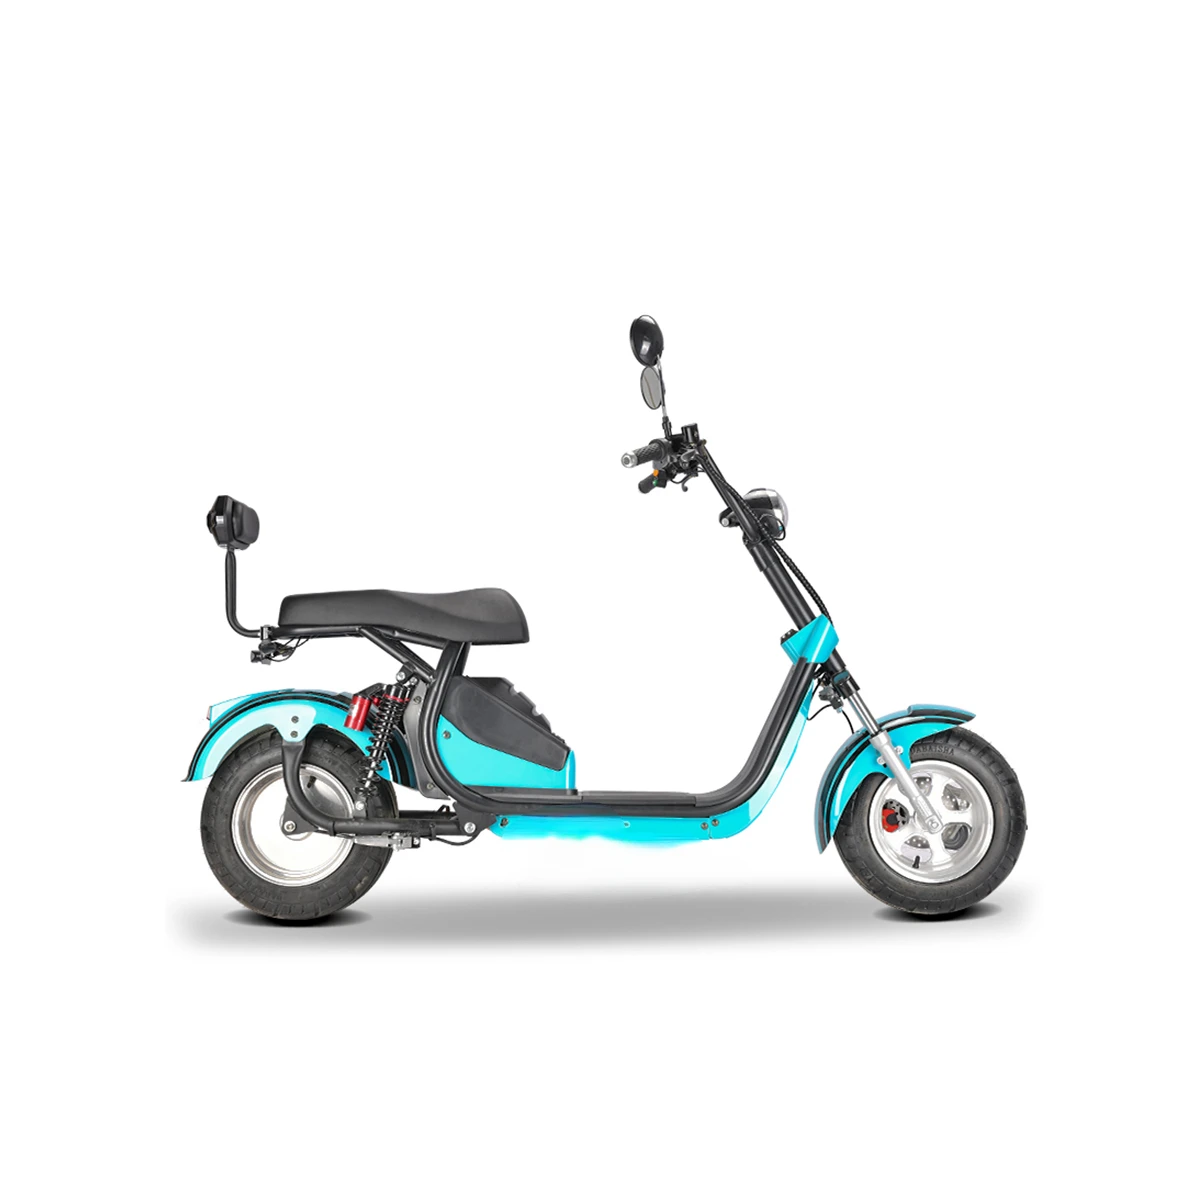 1500w two wheel fast Motorized scooter with seat citycoco motorcycle citycoco style 1000w 1500w high speed electric scooter 5000w electric motorcycle electric wheel